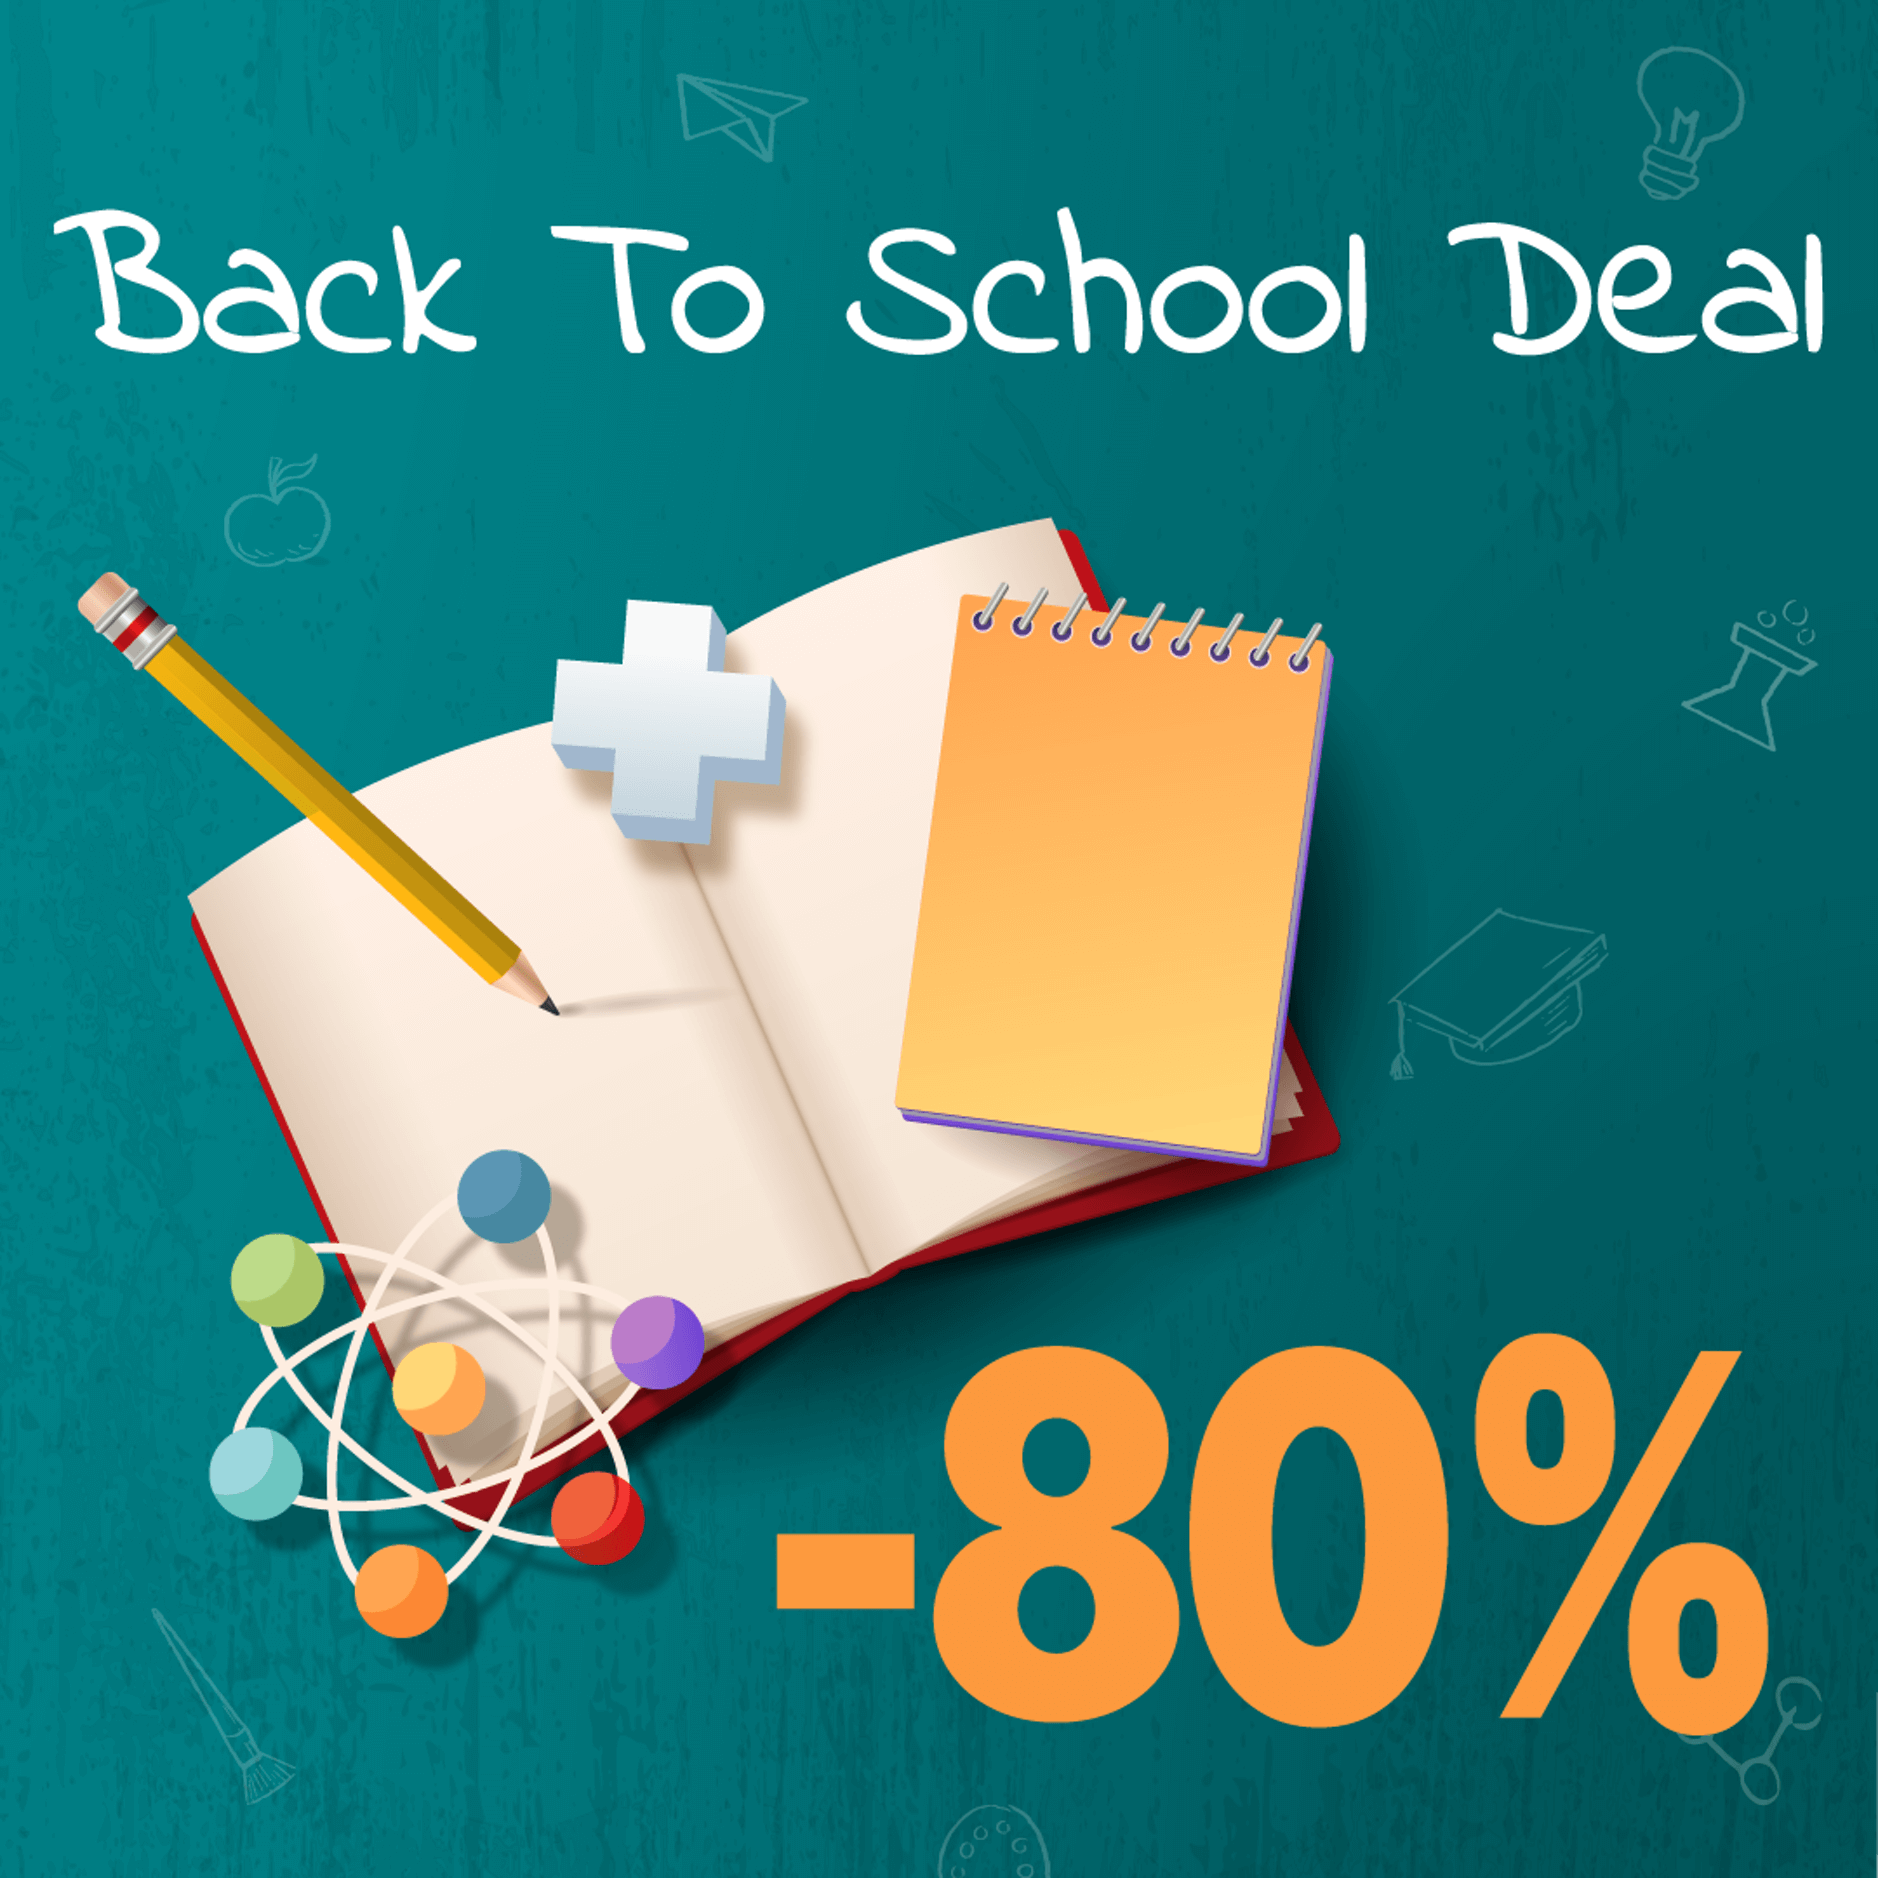 Back-to-School-Deal Banner.